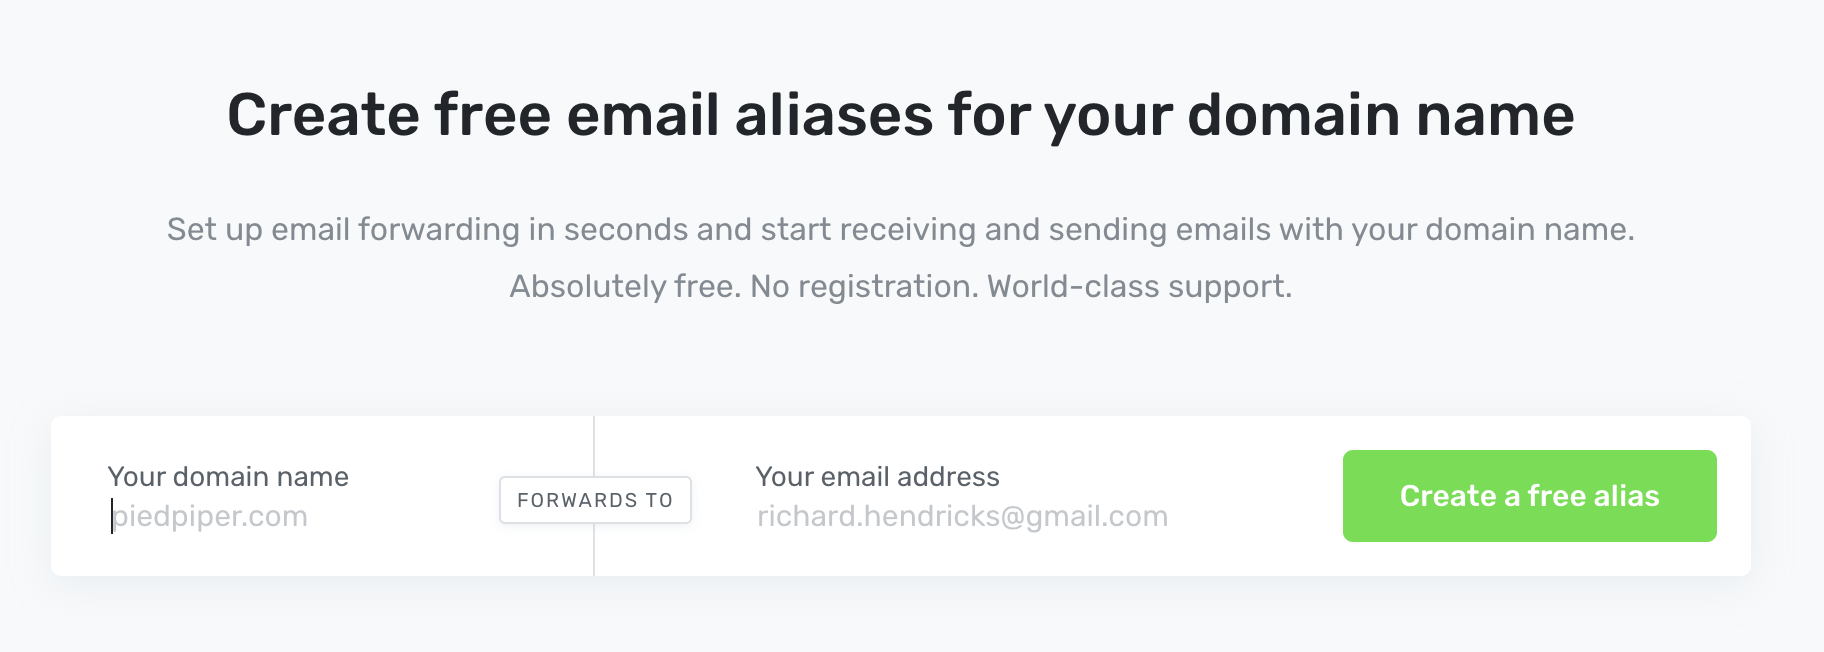 ImprovMX - create free email aliases for your new domain